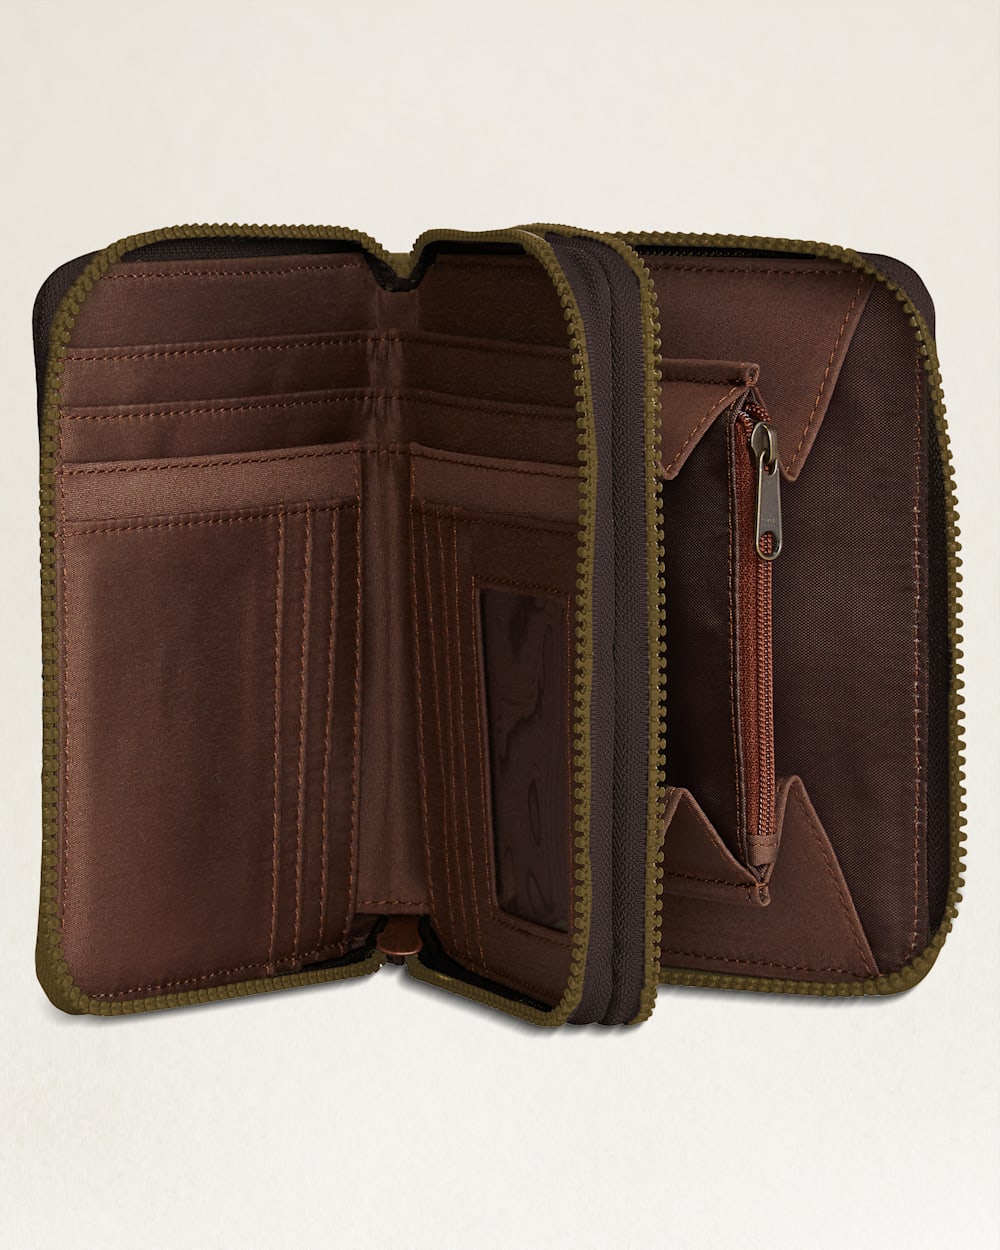 ALTERNATE VIEW OF DESERT DAWN WOOL/LEATHER CROSSBODY ORGANIZER IN TAN MIX image number 3